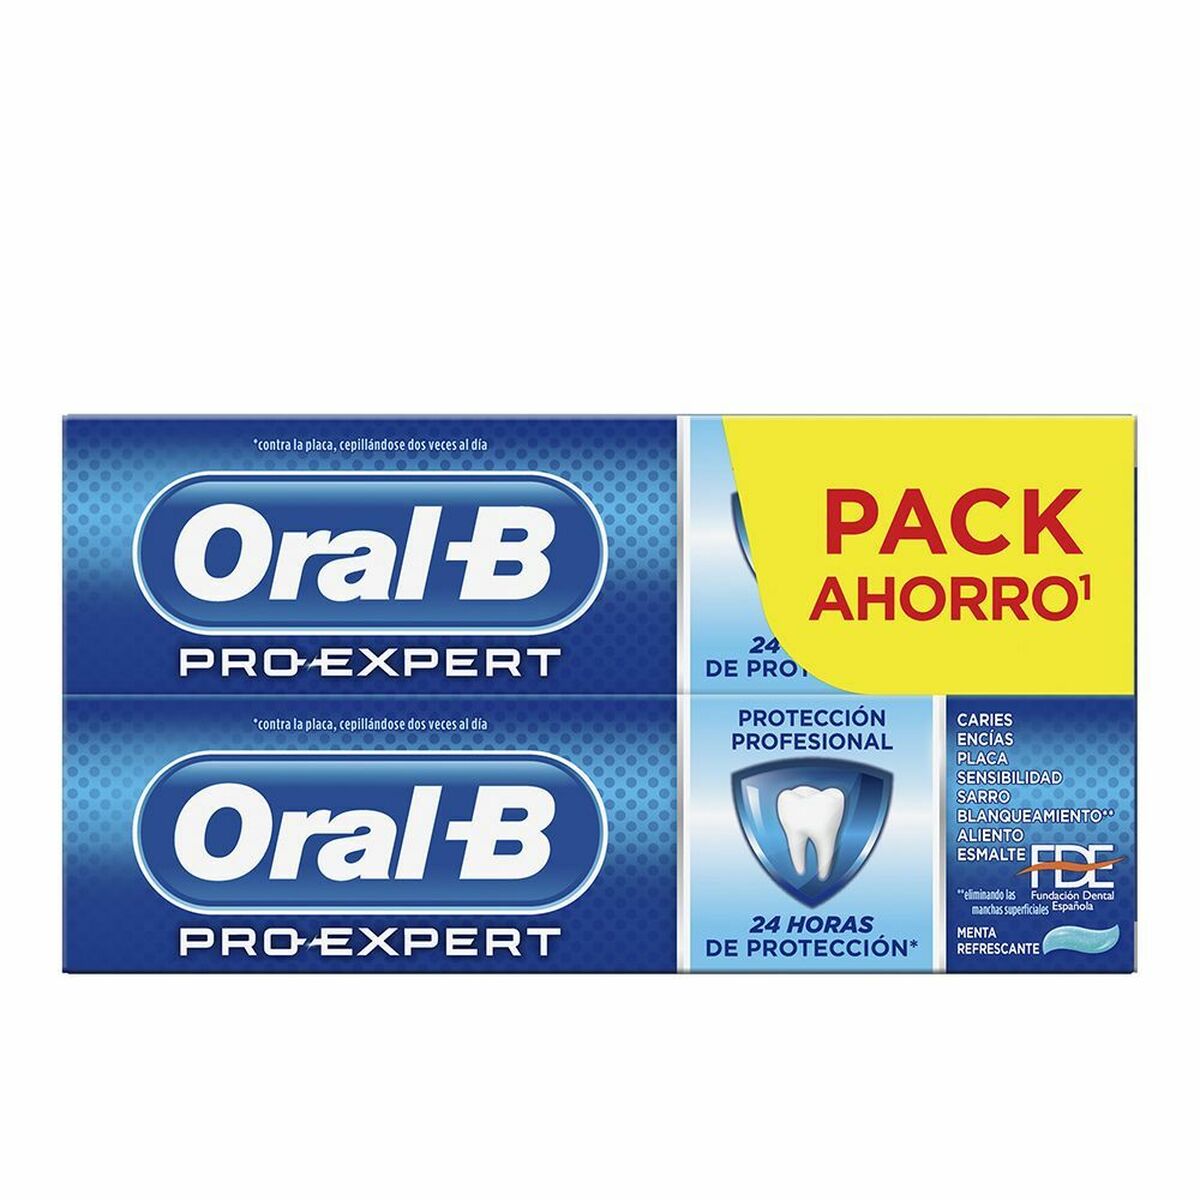 Dentifrice Multiprotection Oral-B Expert Proteccion Profesional Dentífrico 75 ml (2 x 75 ml)